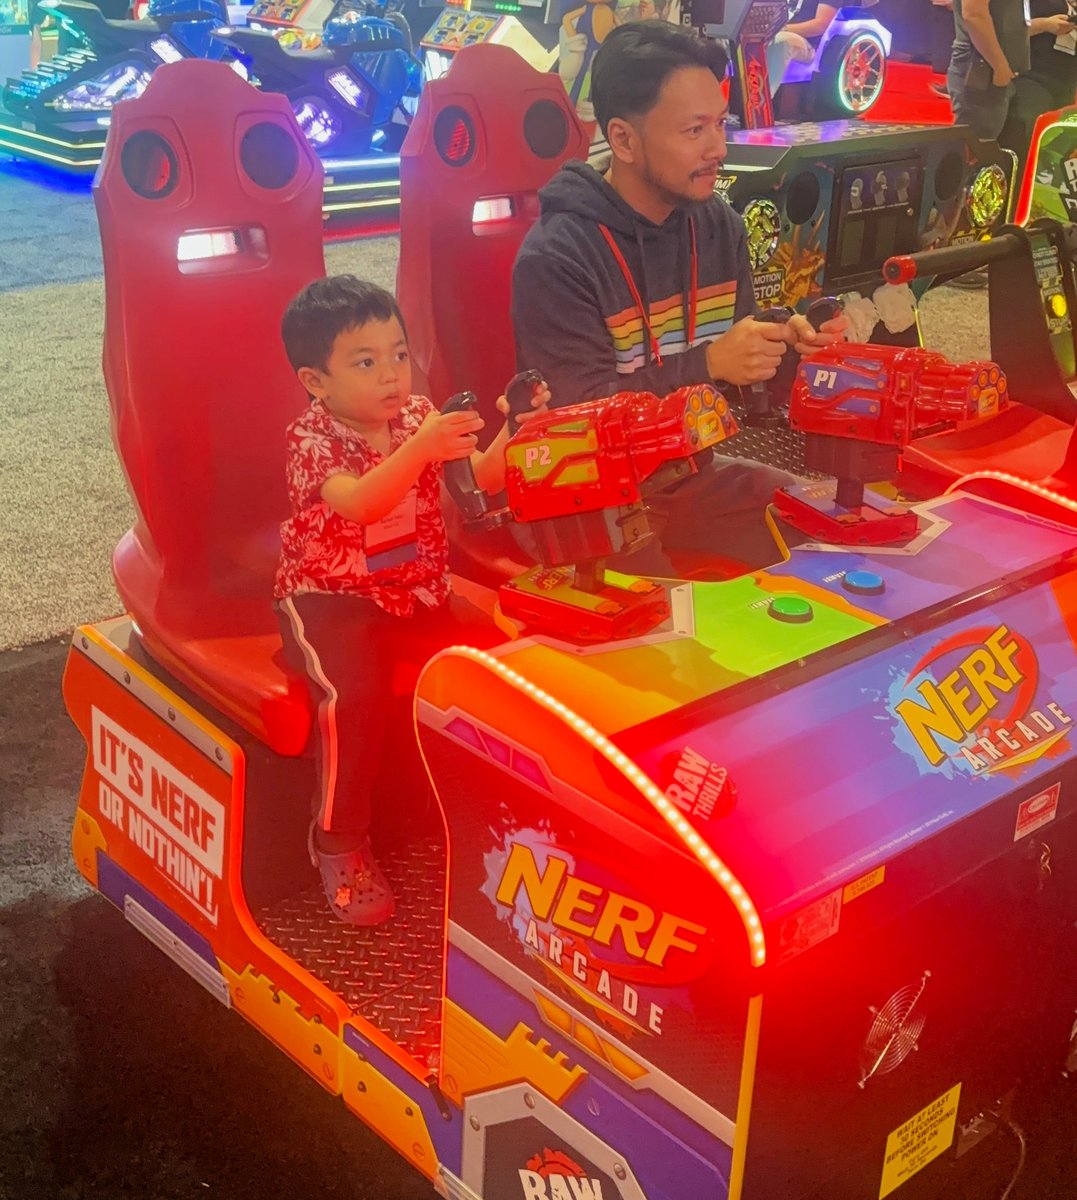 NERF Arcade is all about fun and family! Simple, exciting, and fast-paced gameplay keeps players on their toes blasting away to earn as many points as possible. It's NERF or Nothin'!💥💥 #Nerf #NerforNothin #NerfArcade #RawThrills